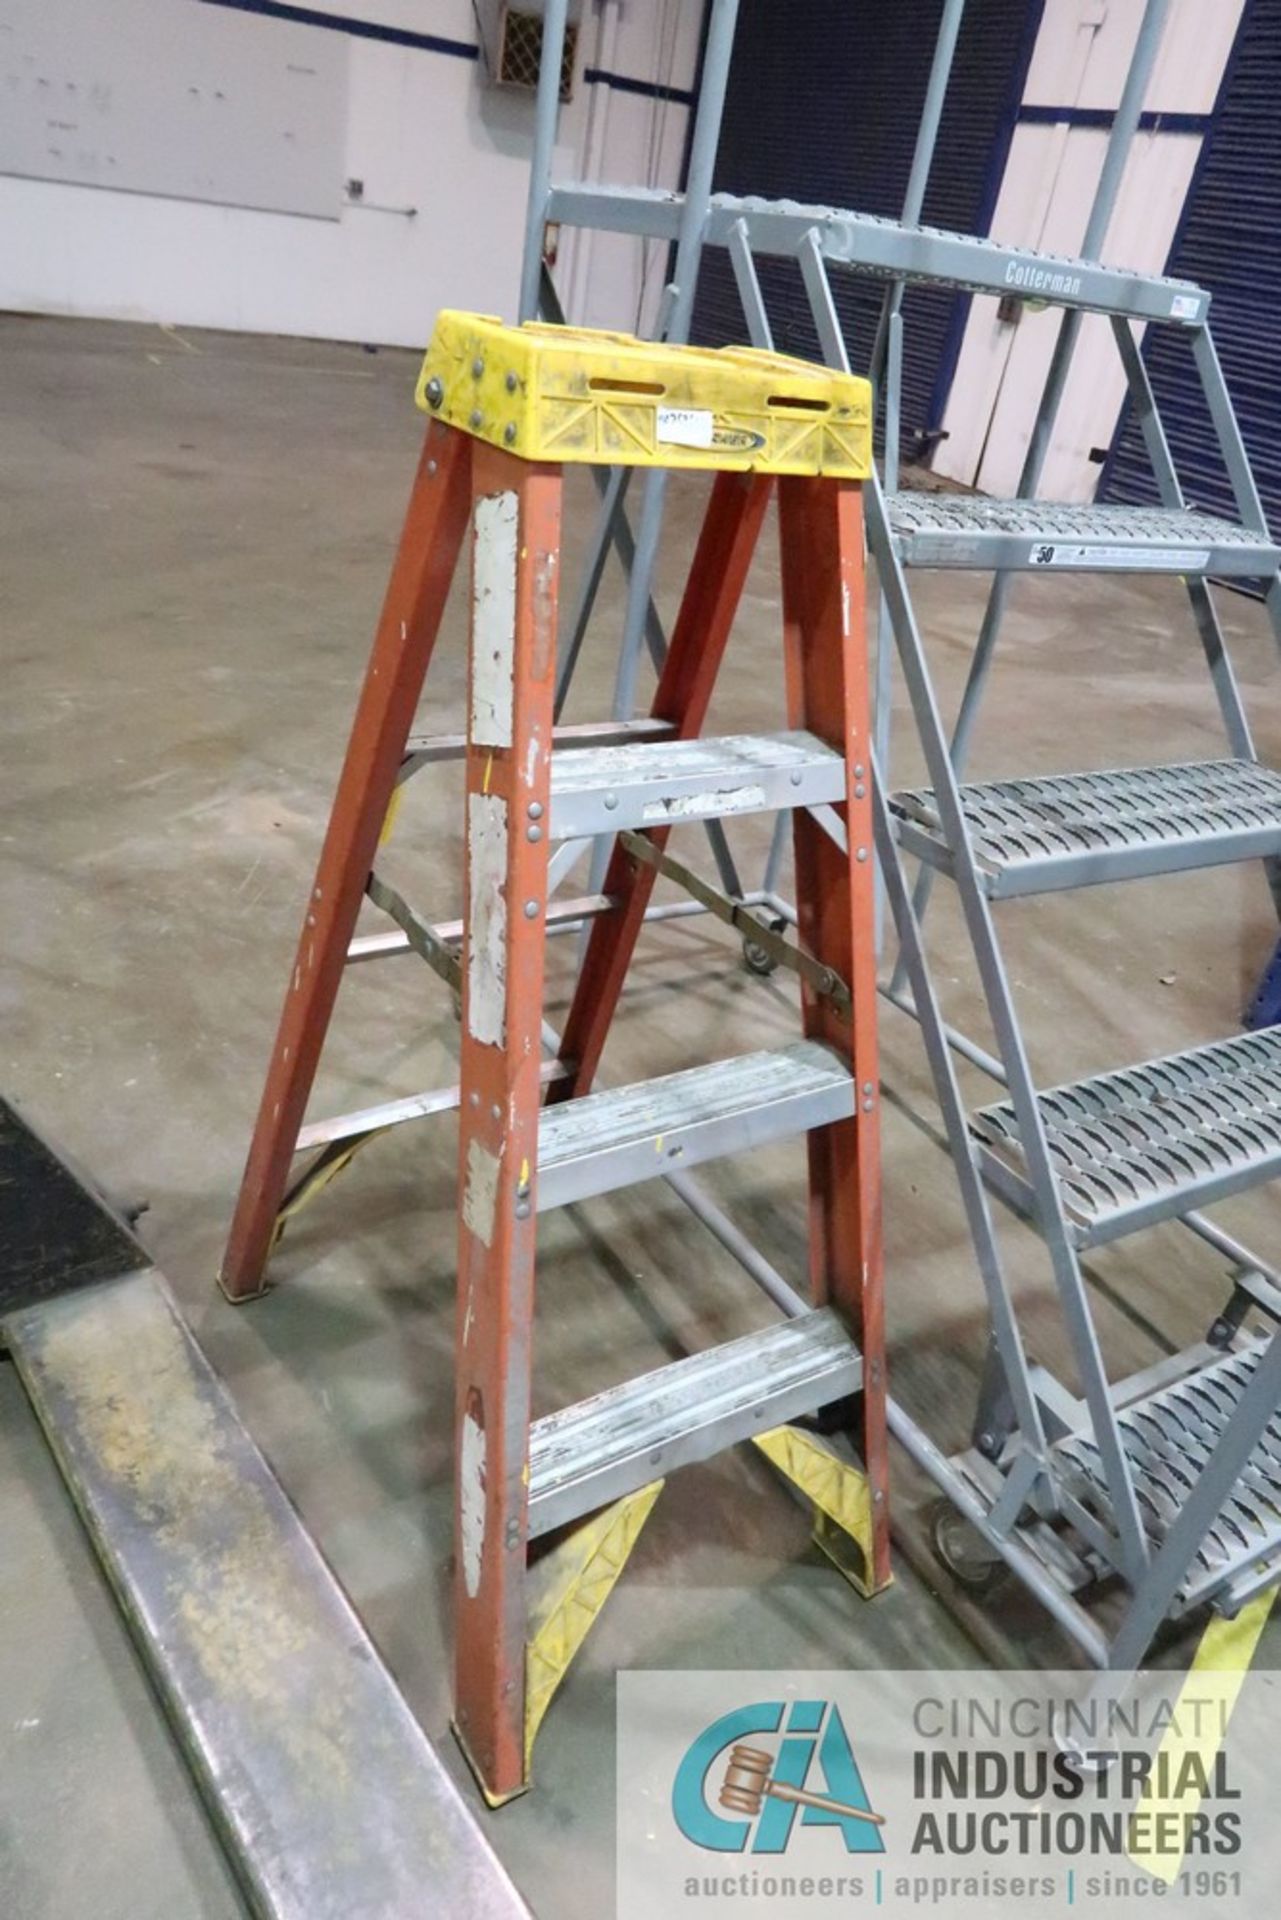 (LOT) 50" PORTABLE SHOP LADDER, 4' STEP LADDER, HYDRAULIC PALLET TRUCK - Image 4 of 5